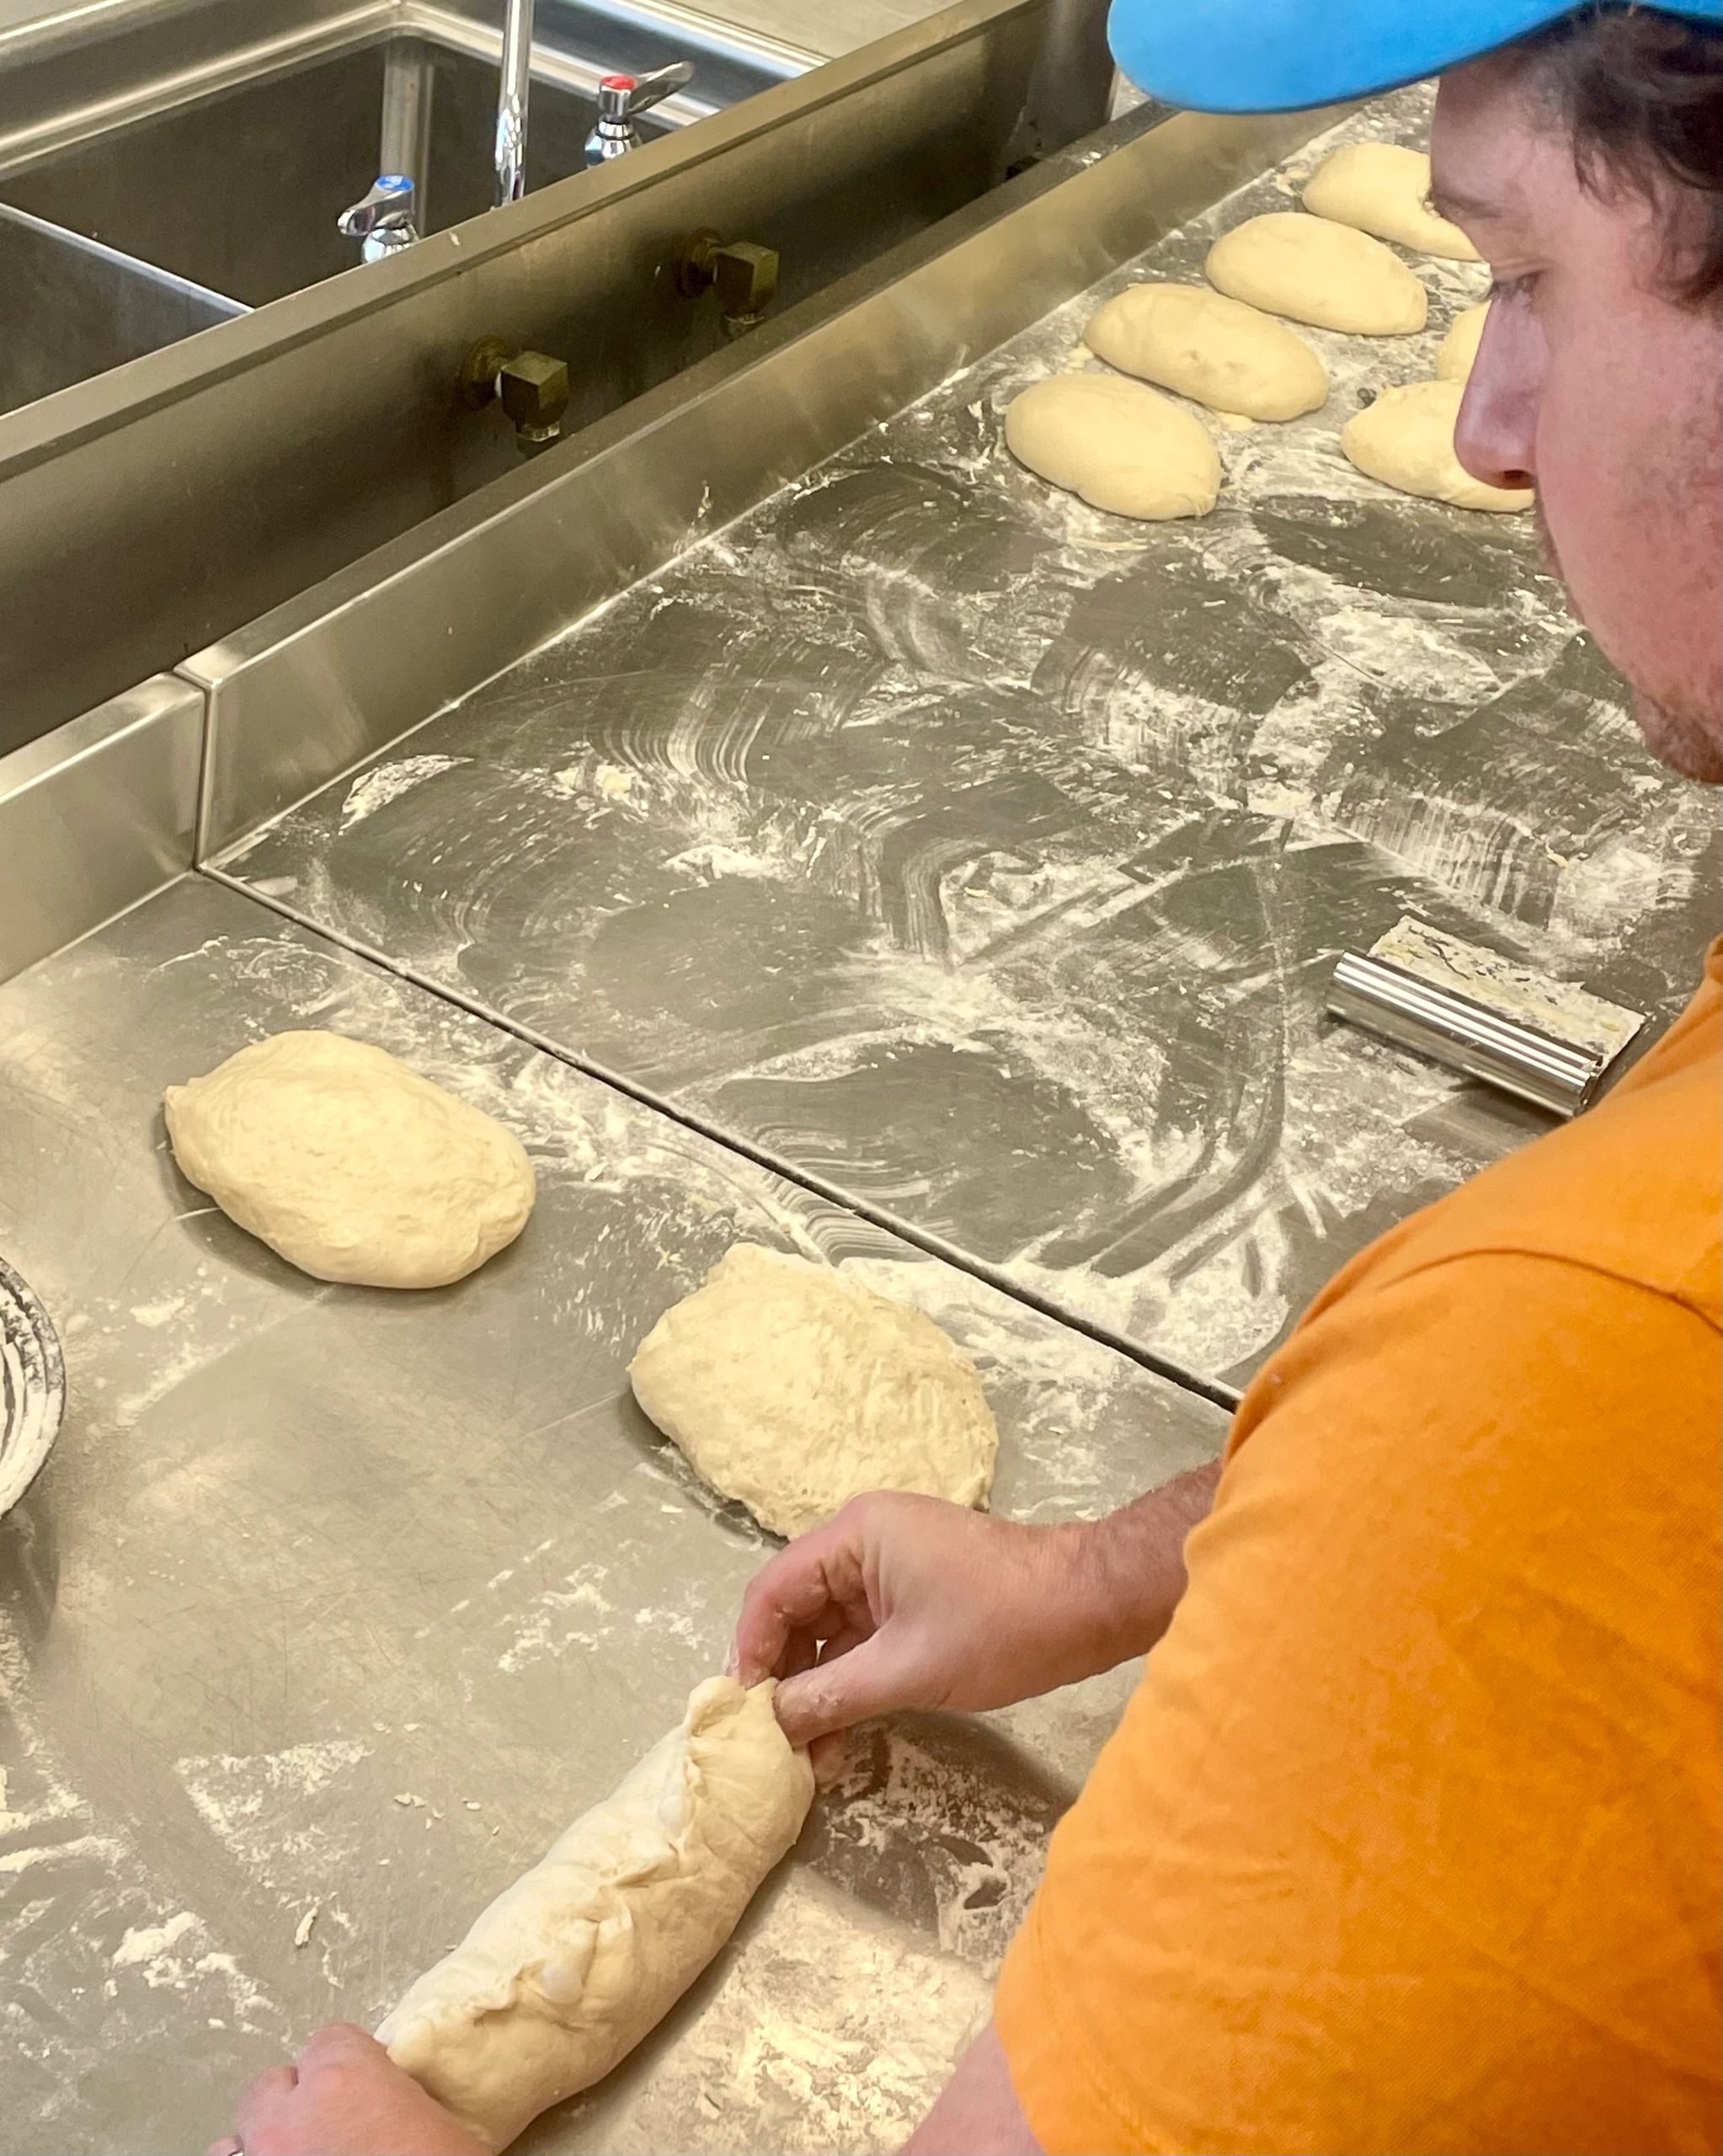 Bakery teaches how to make sourdough bread for a cooking class at North Myrtle Beach bakery. 